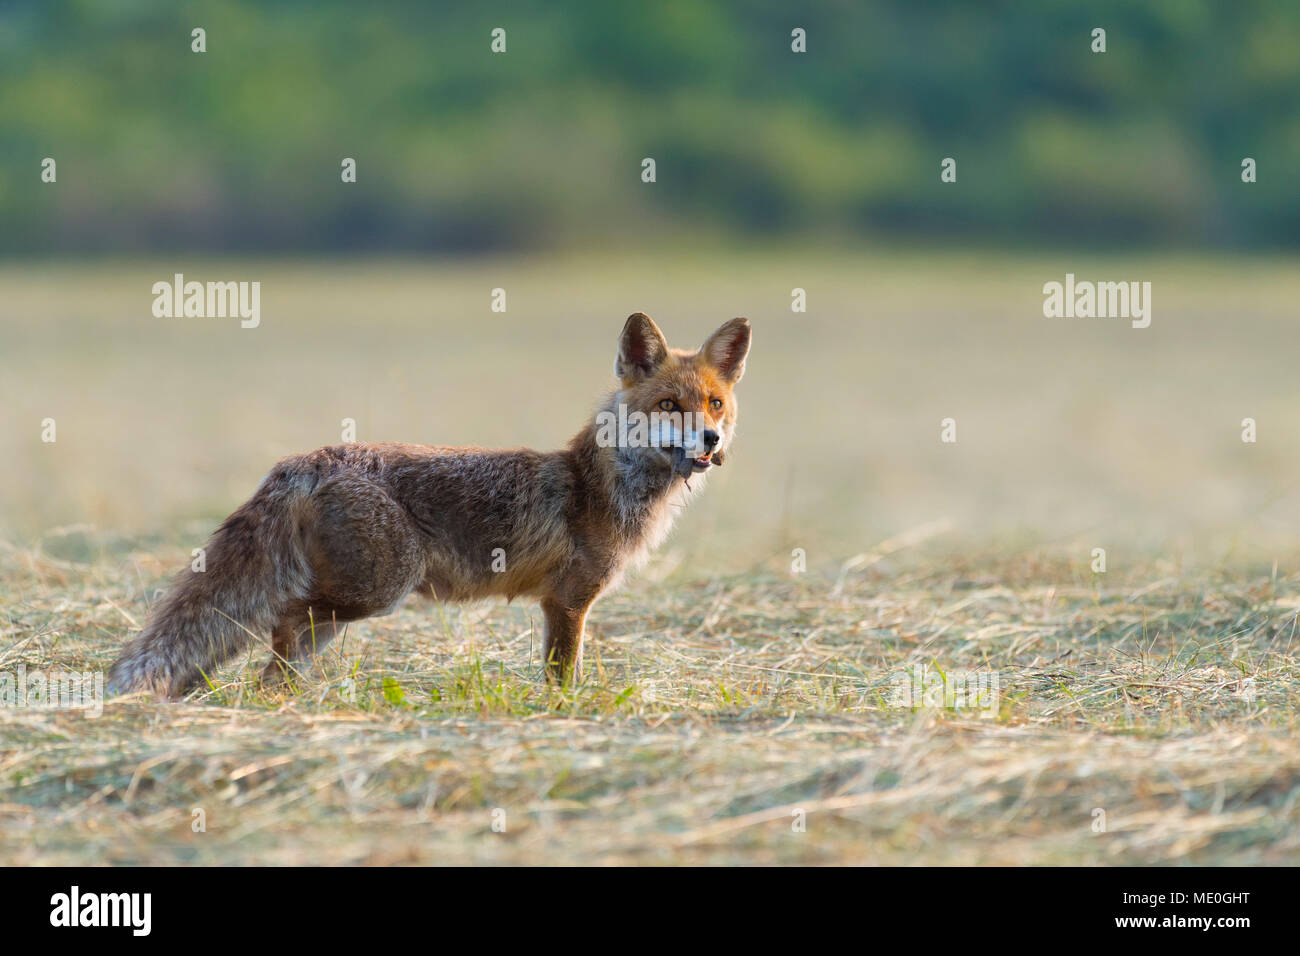 Red fox (Vulpes vulpes) with mouse in mouth standing on mowed meadow and looking into the distance in Hesse, Germany Stock Photo